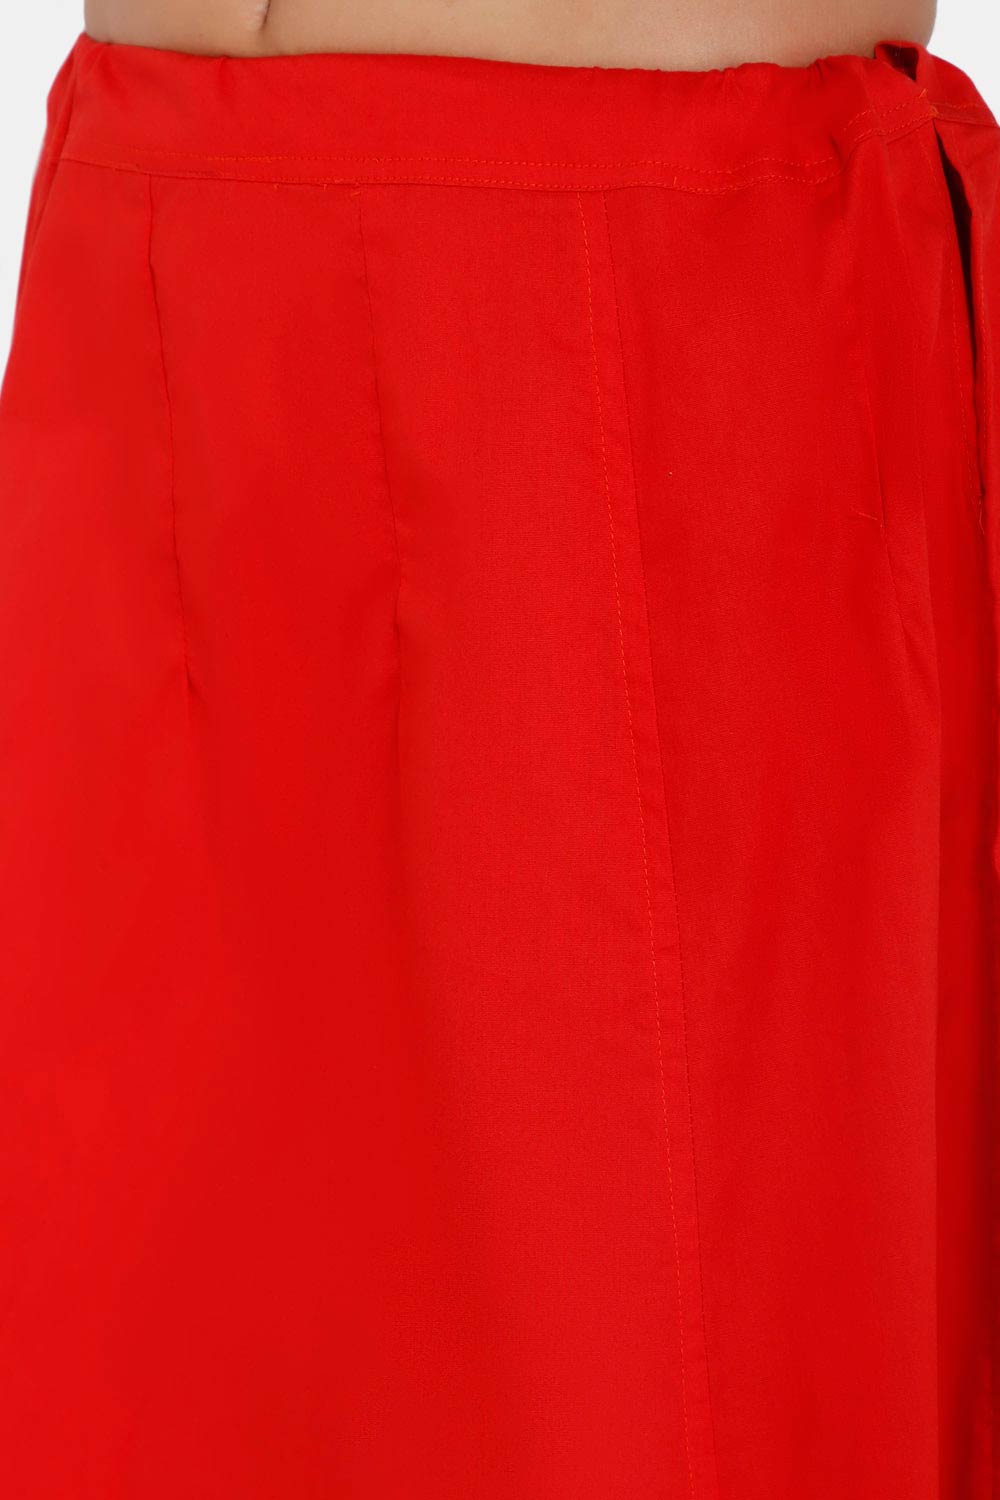 Naiduhall Petticoat - HP40 Size   40 Color RED